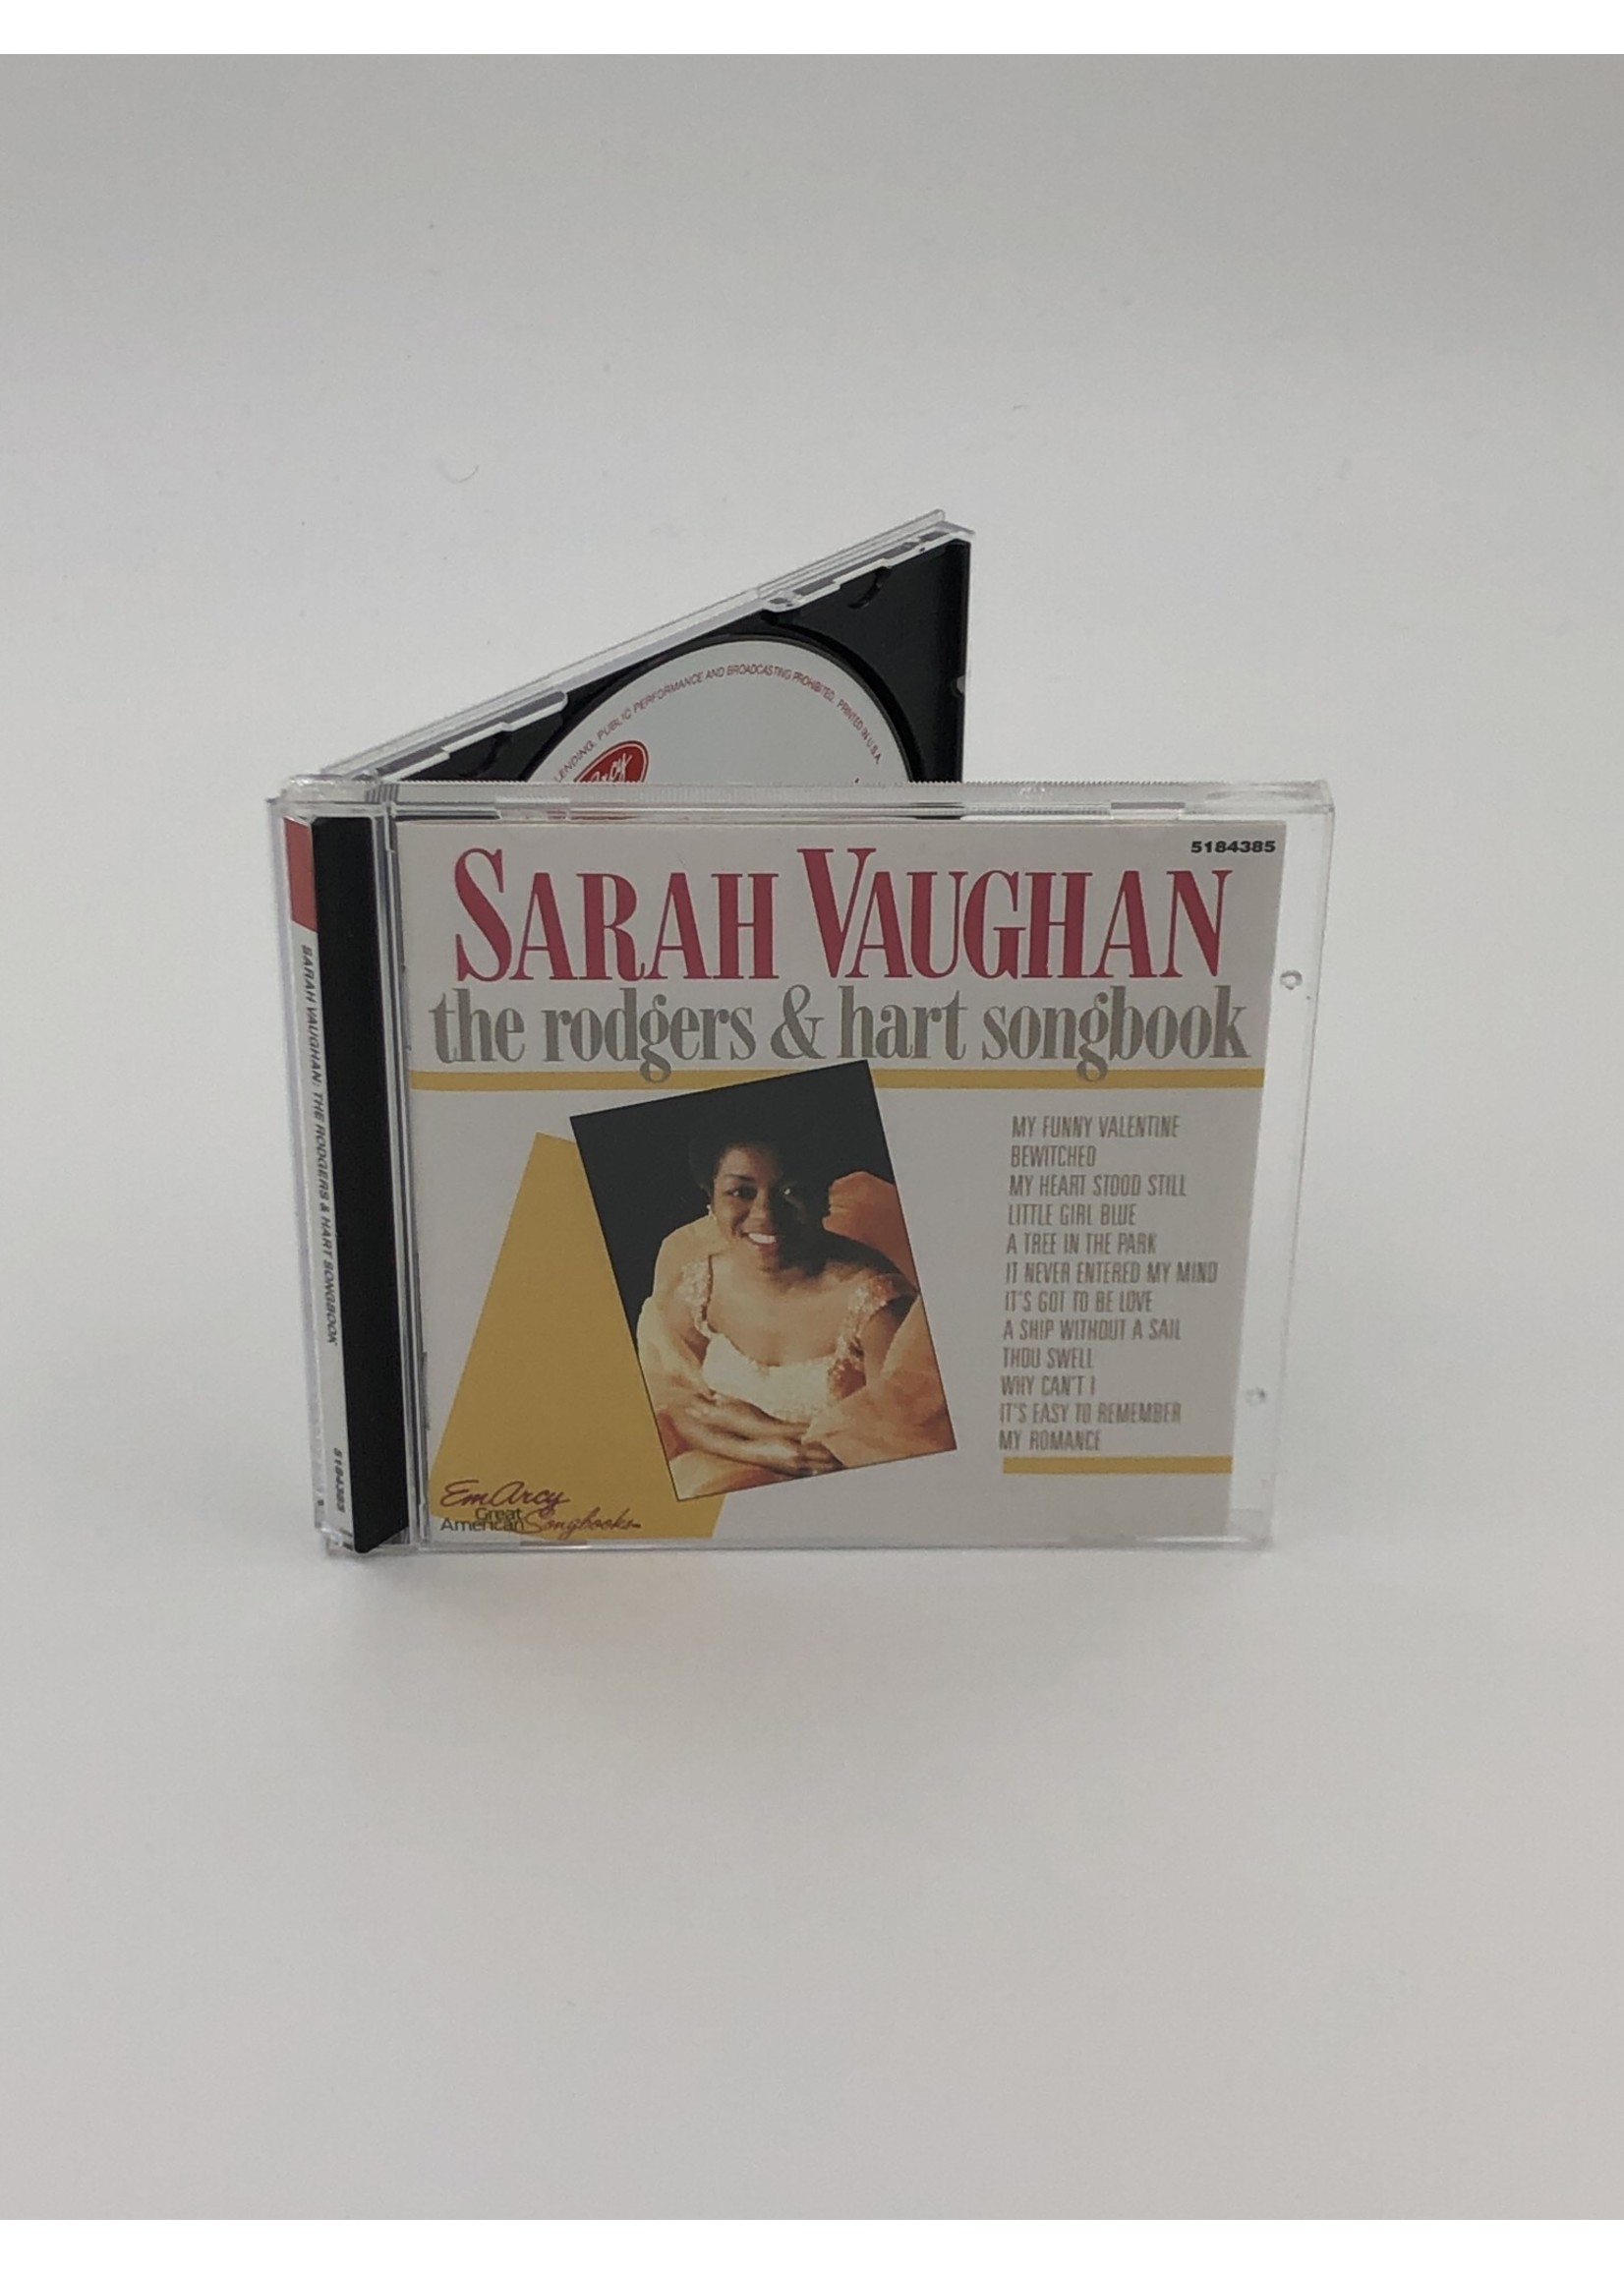 CD Sarah Vaughan The Rodgers And Hart Songbook CD